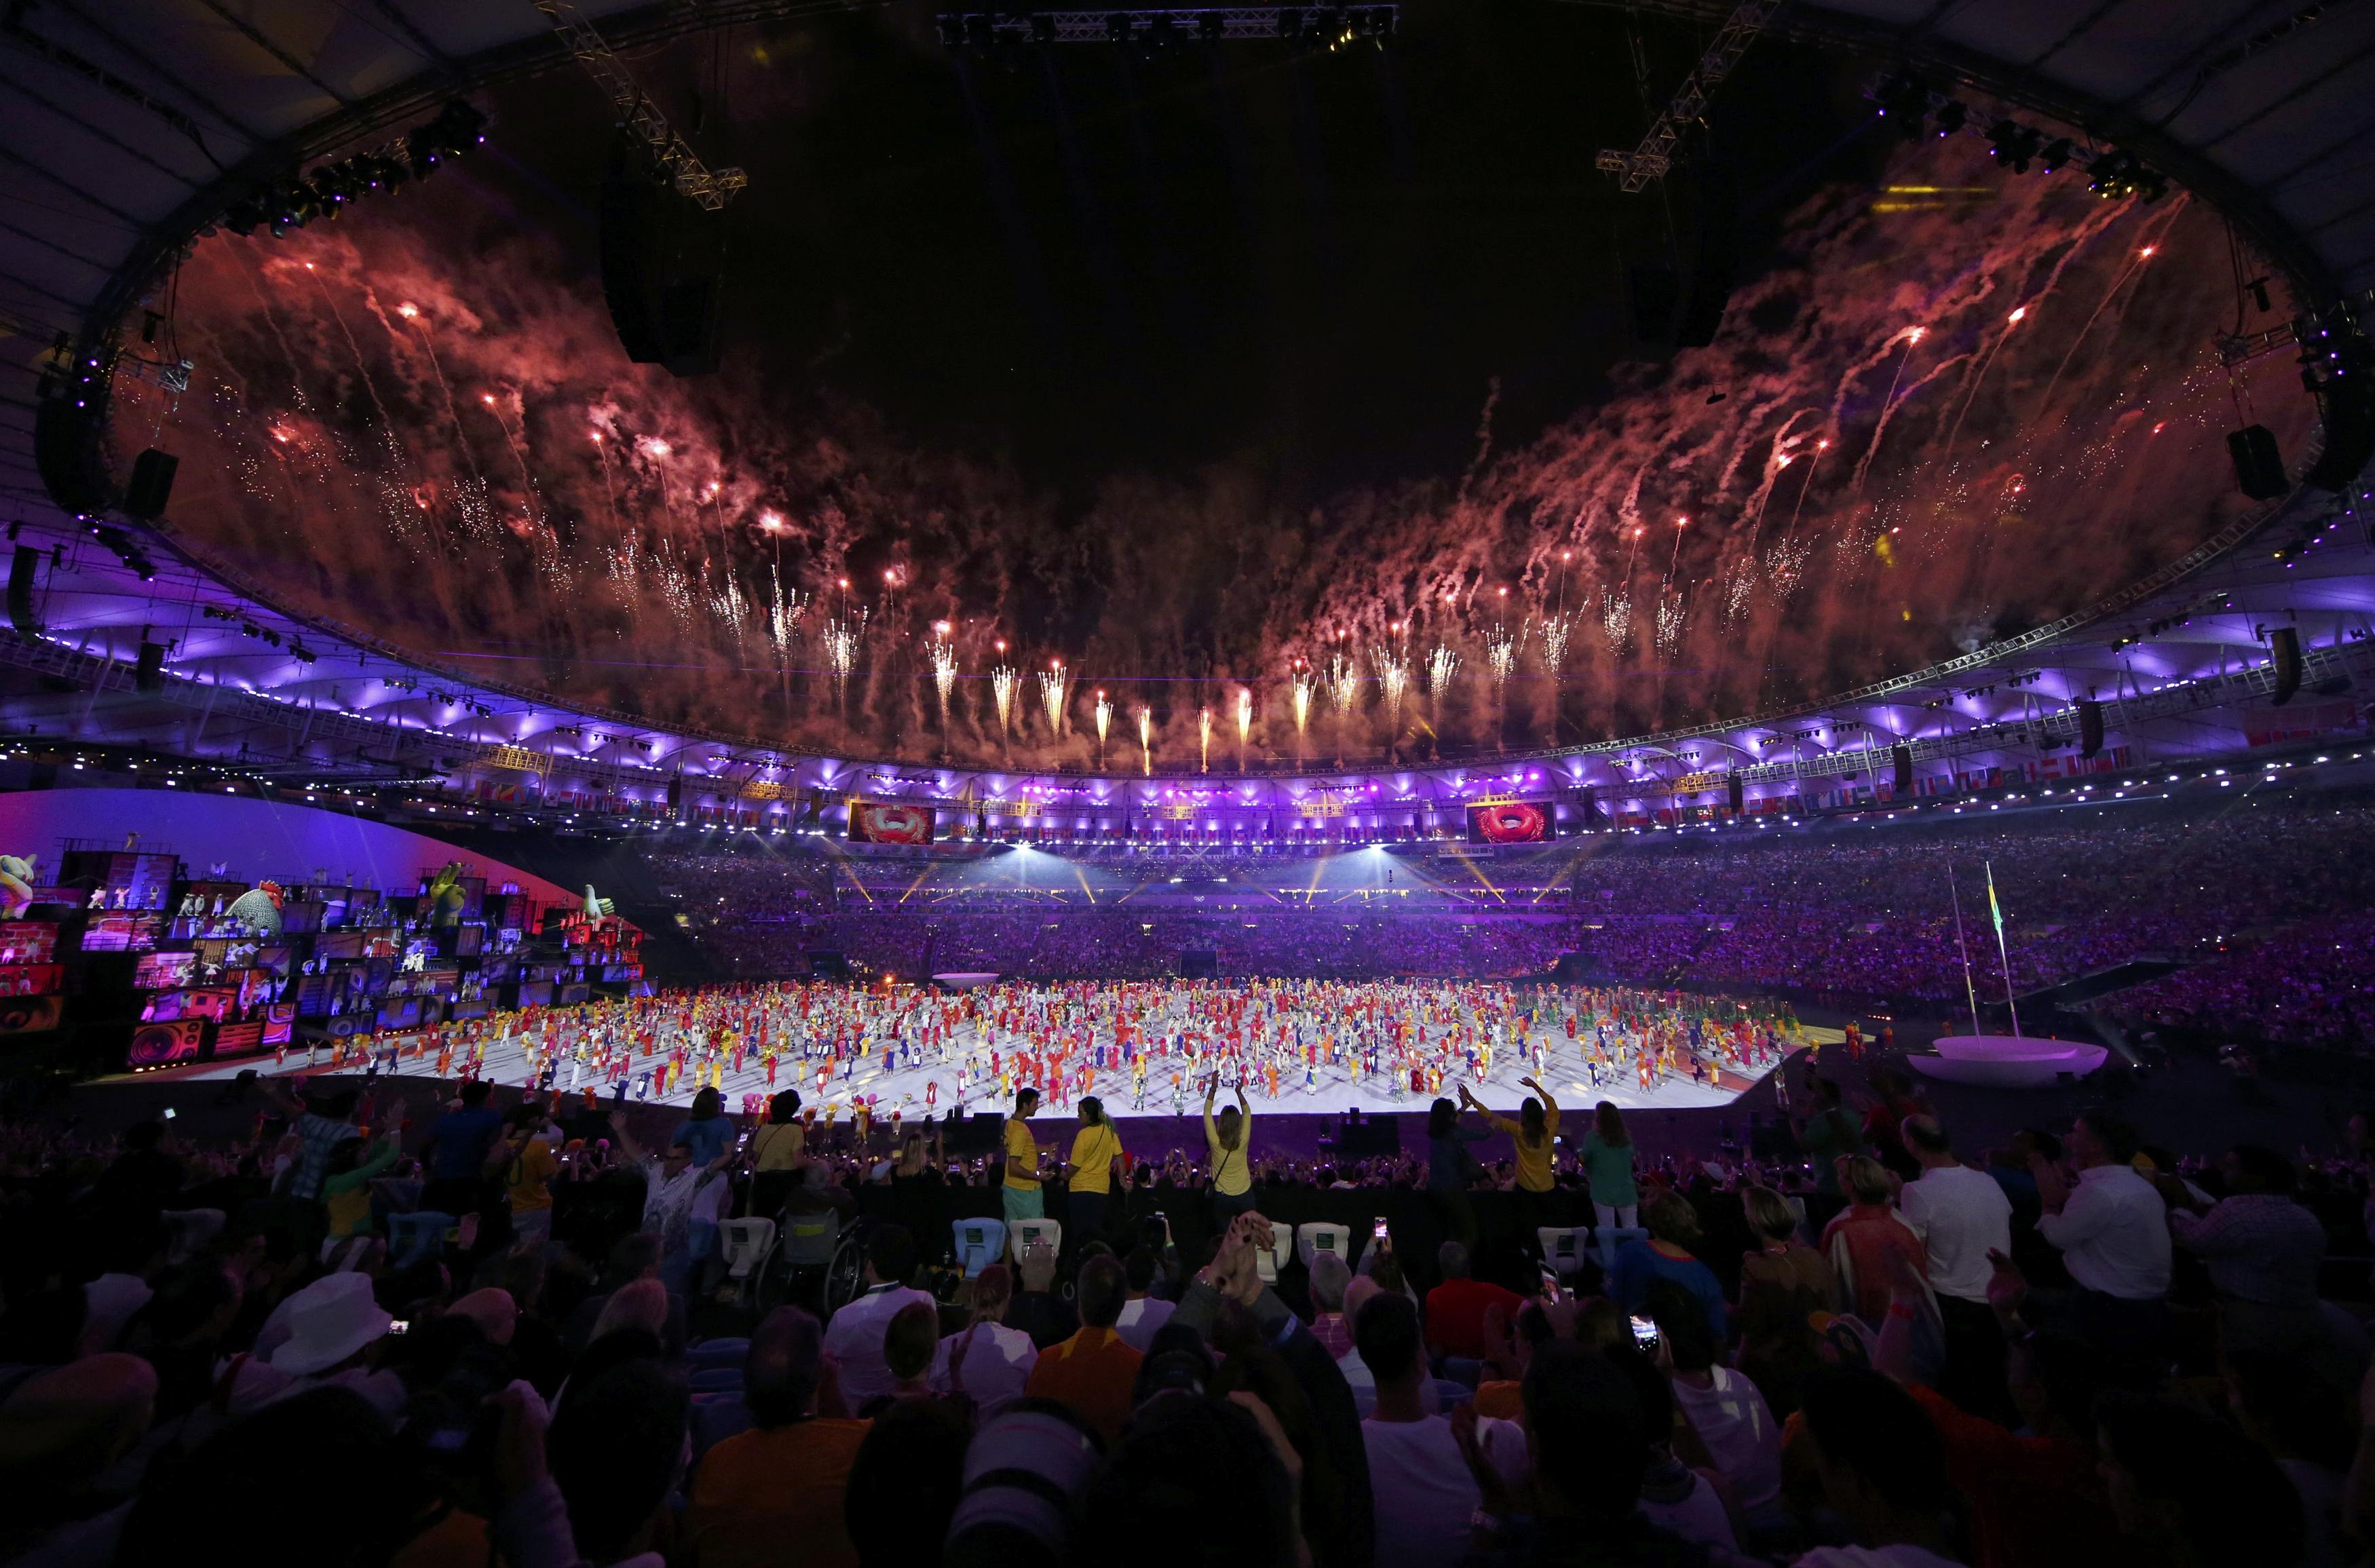 2016 Rio Olympics - Opening ceremony - Maracana - Rio de Janeiro, Brazil - 05/08/2016. Performers take part in the opening ceremony. REUTERS/Andrew Boyers FOR EDITORIAL USE ONLY. NOT FOR SALE FOR MARKETING OR ADVERTISING CAMPAIGNS.